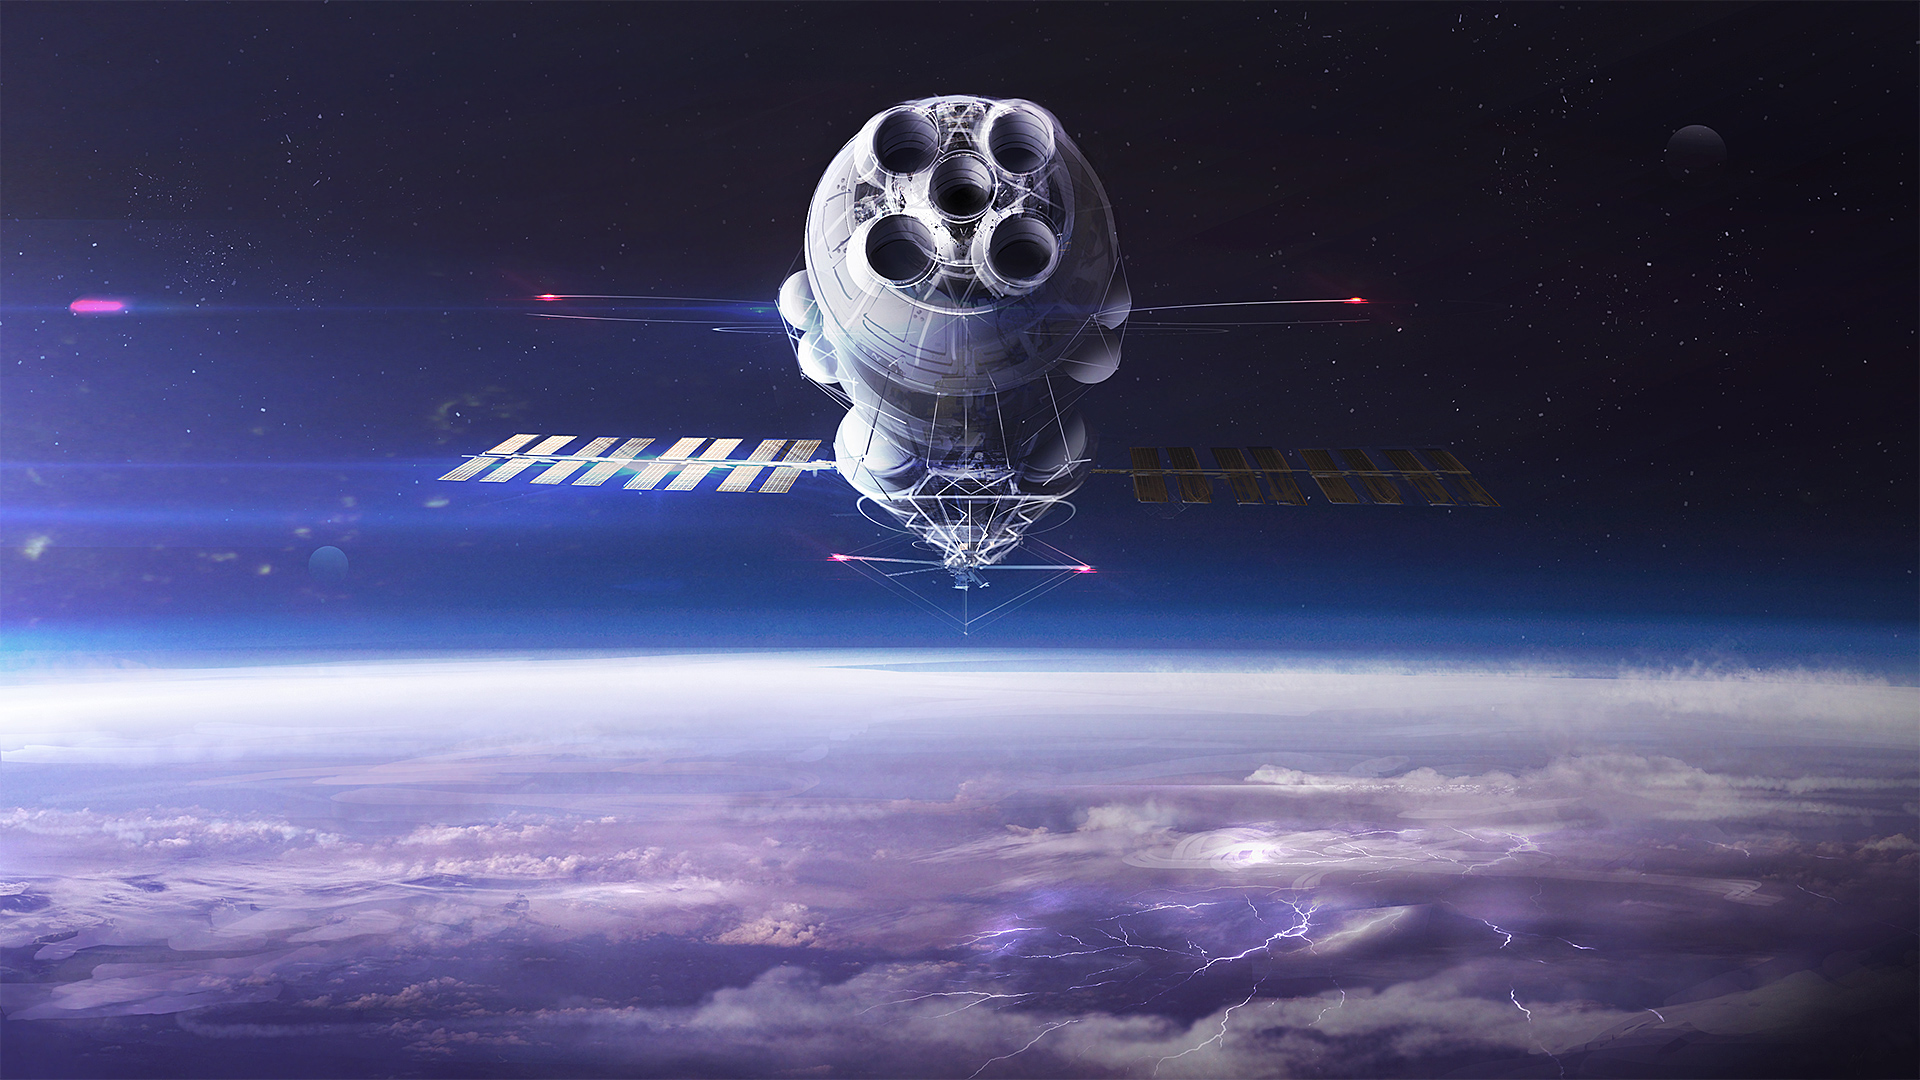 Comm Spaceship Wallpapers | Wallpapers HD